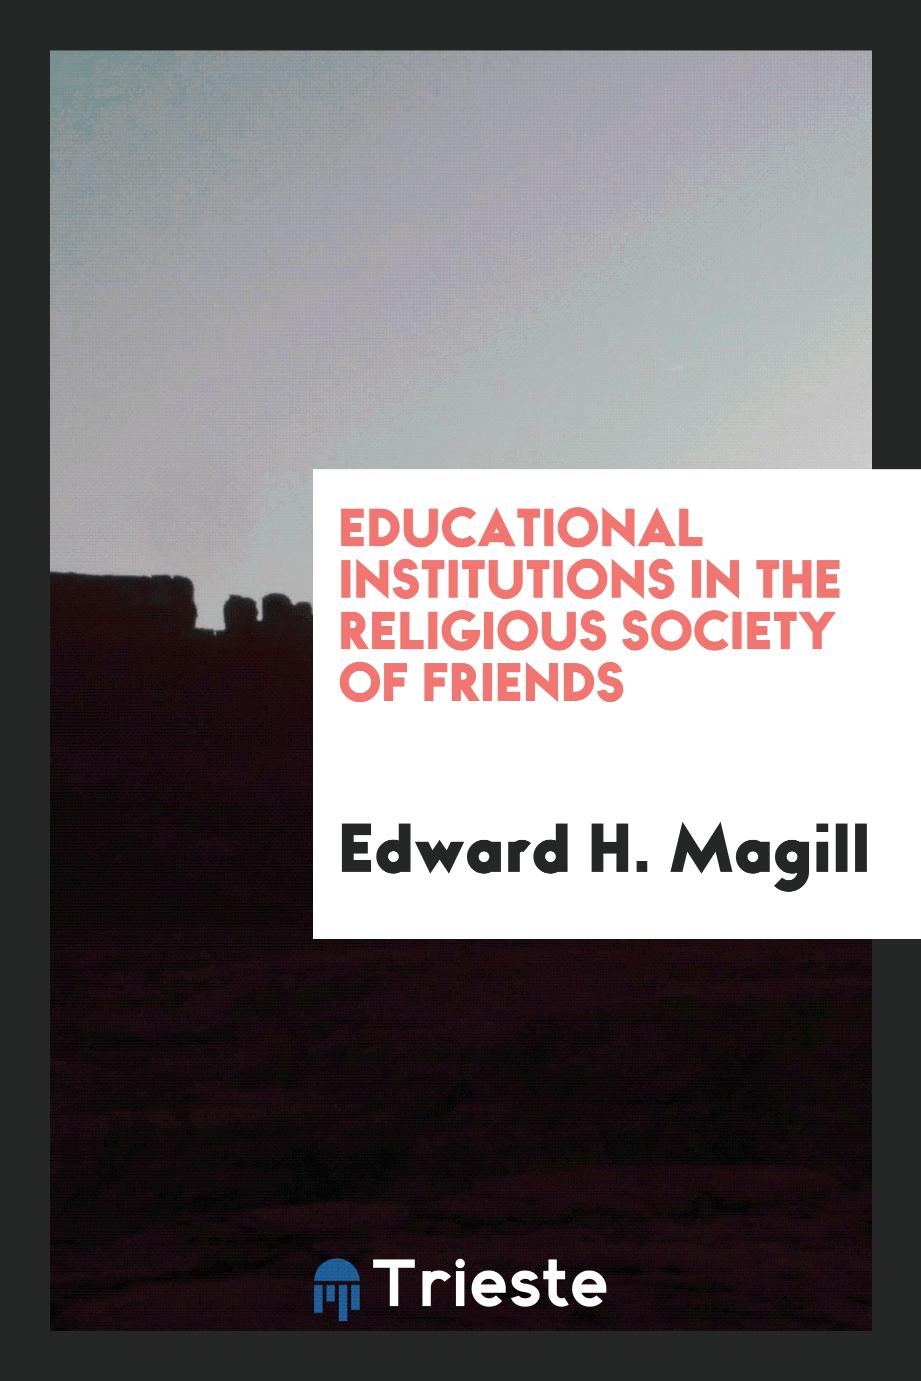 Educational Institutions in the Religious Society of Friends